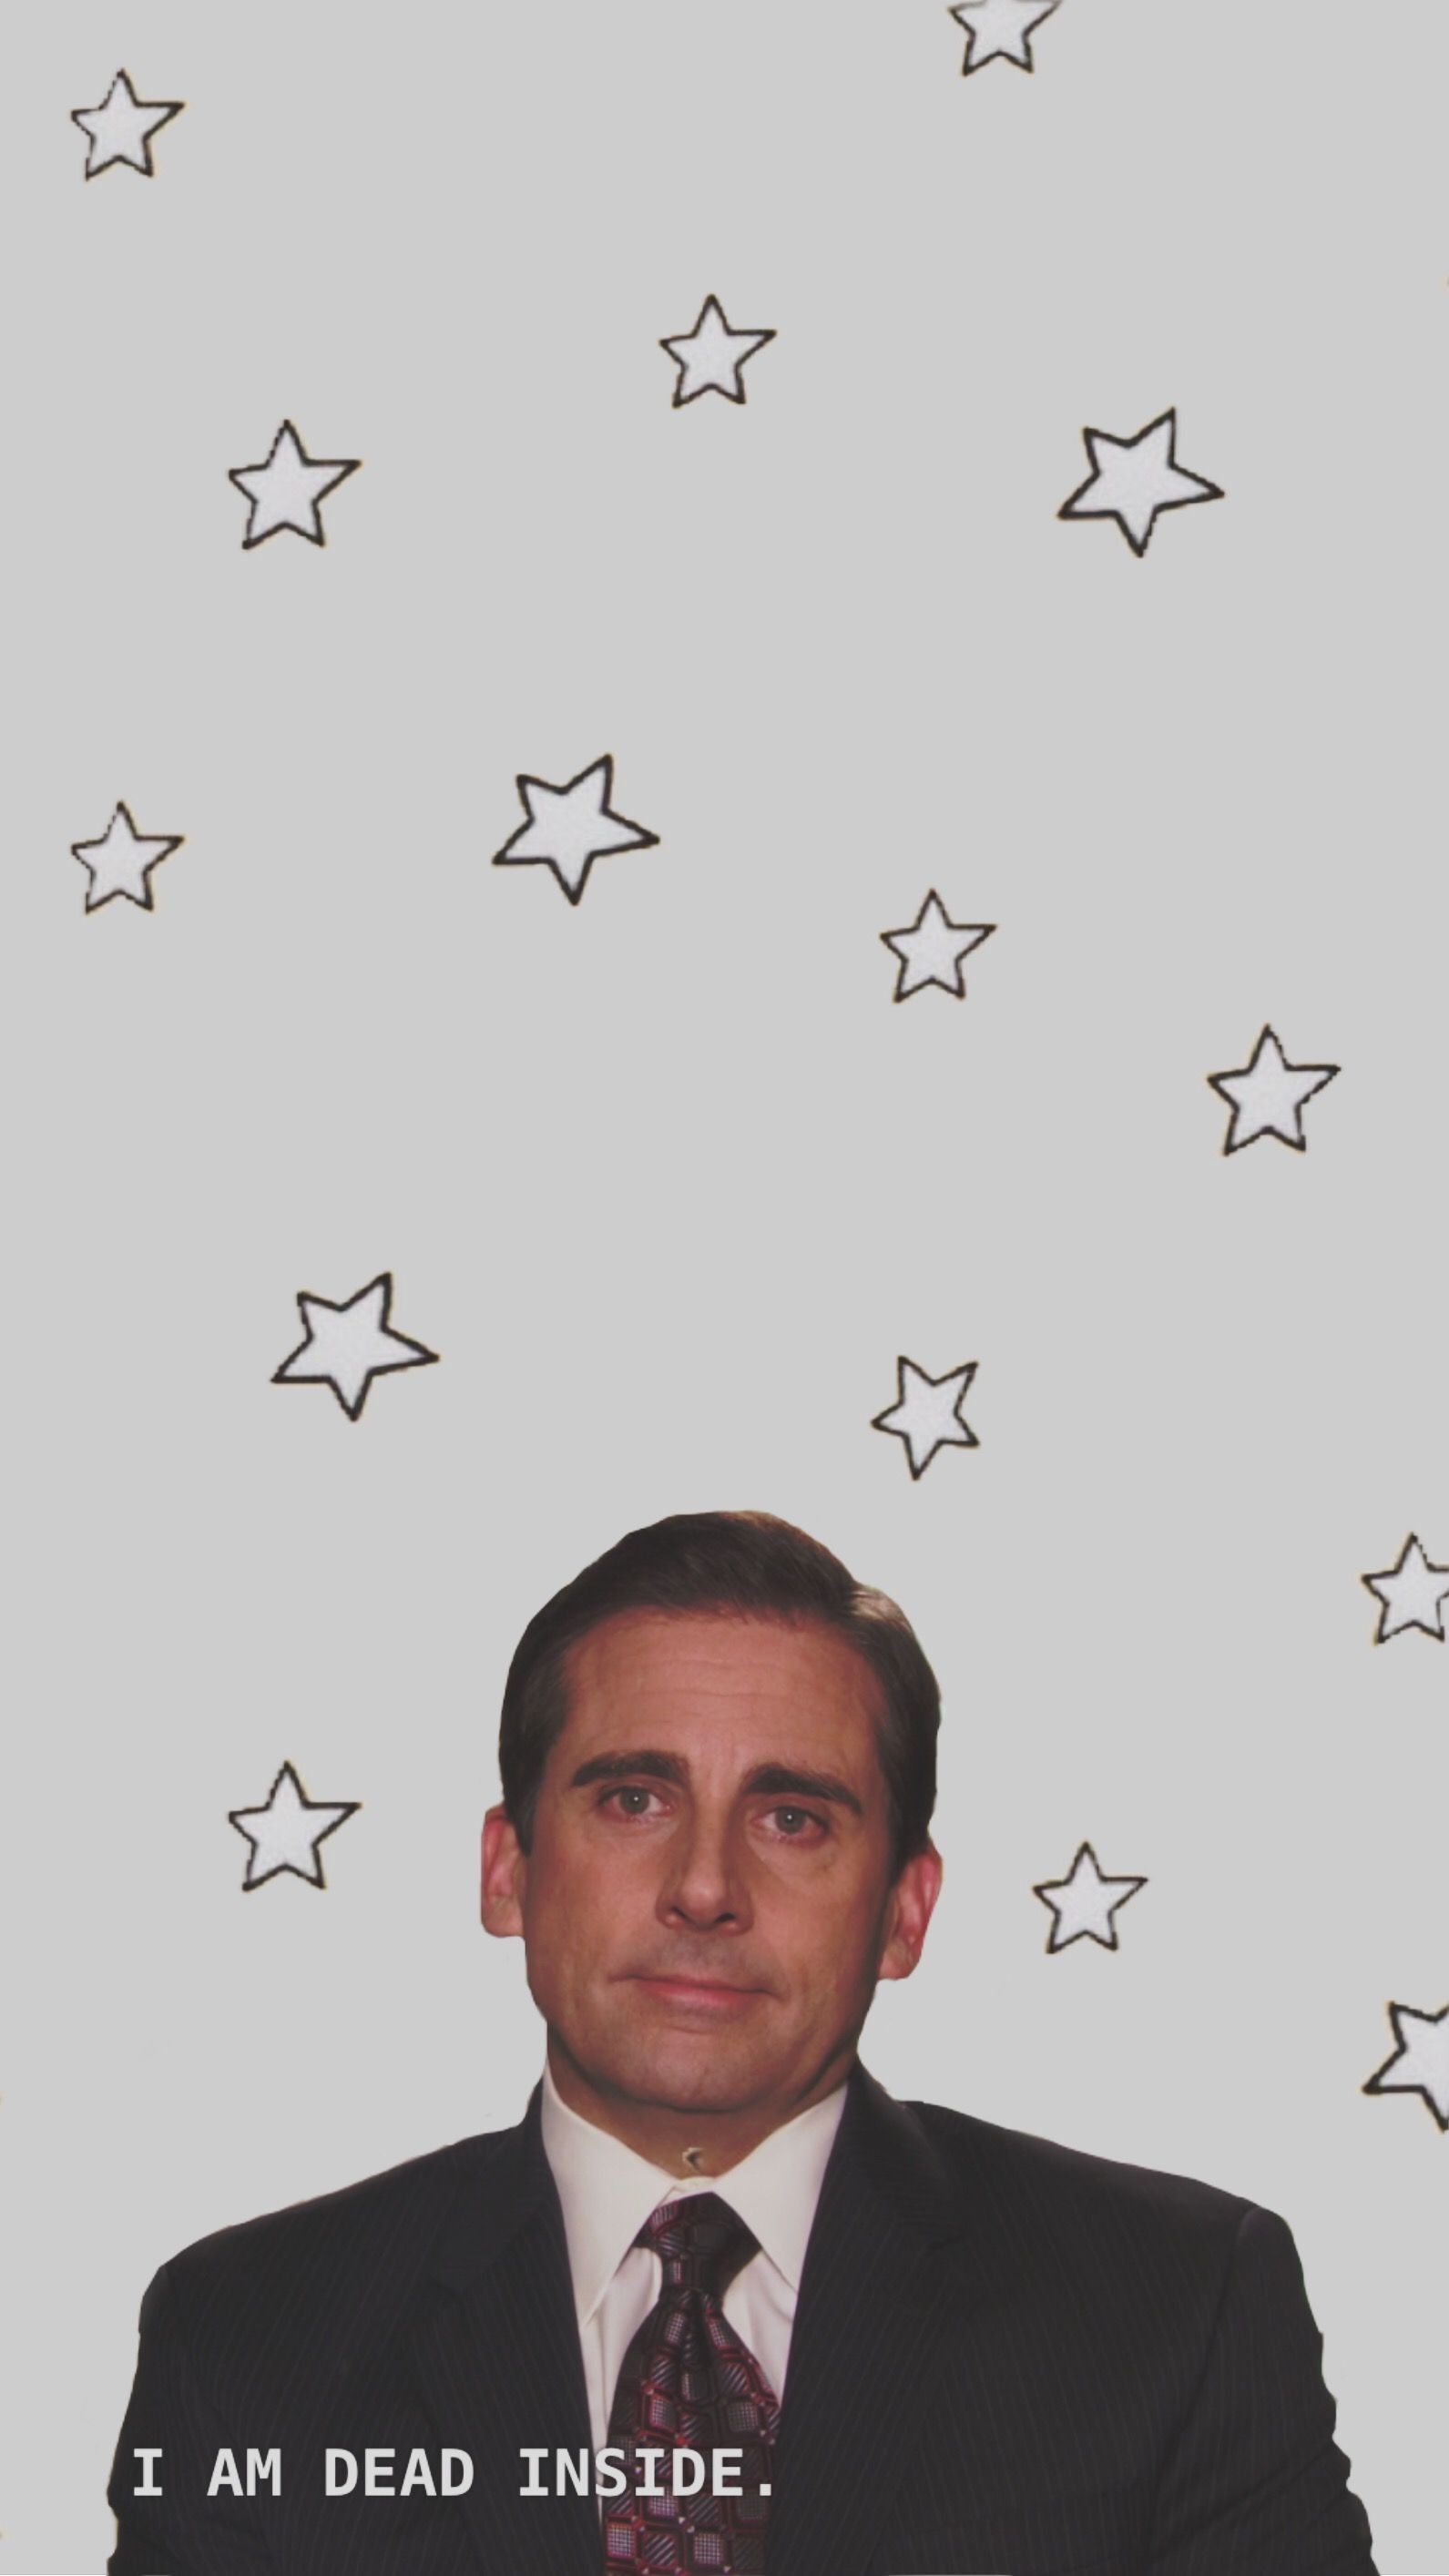 The Office iPhone Wallpaper, Buy Now, on Sale, 55% OFF